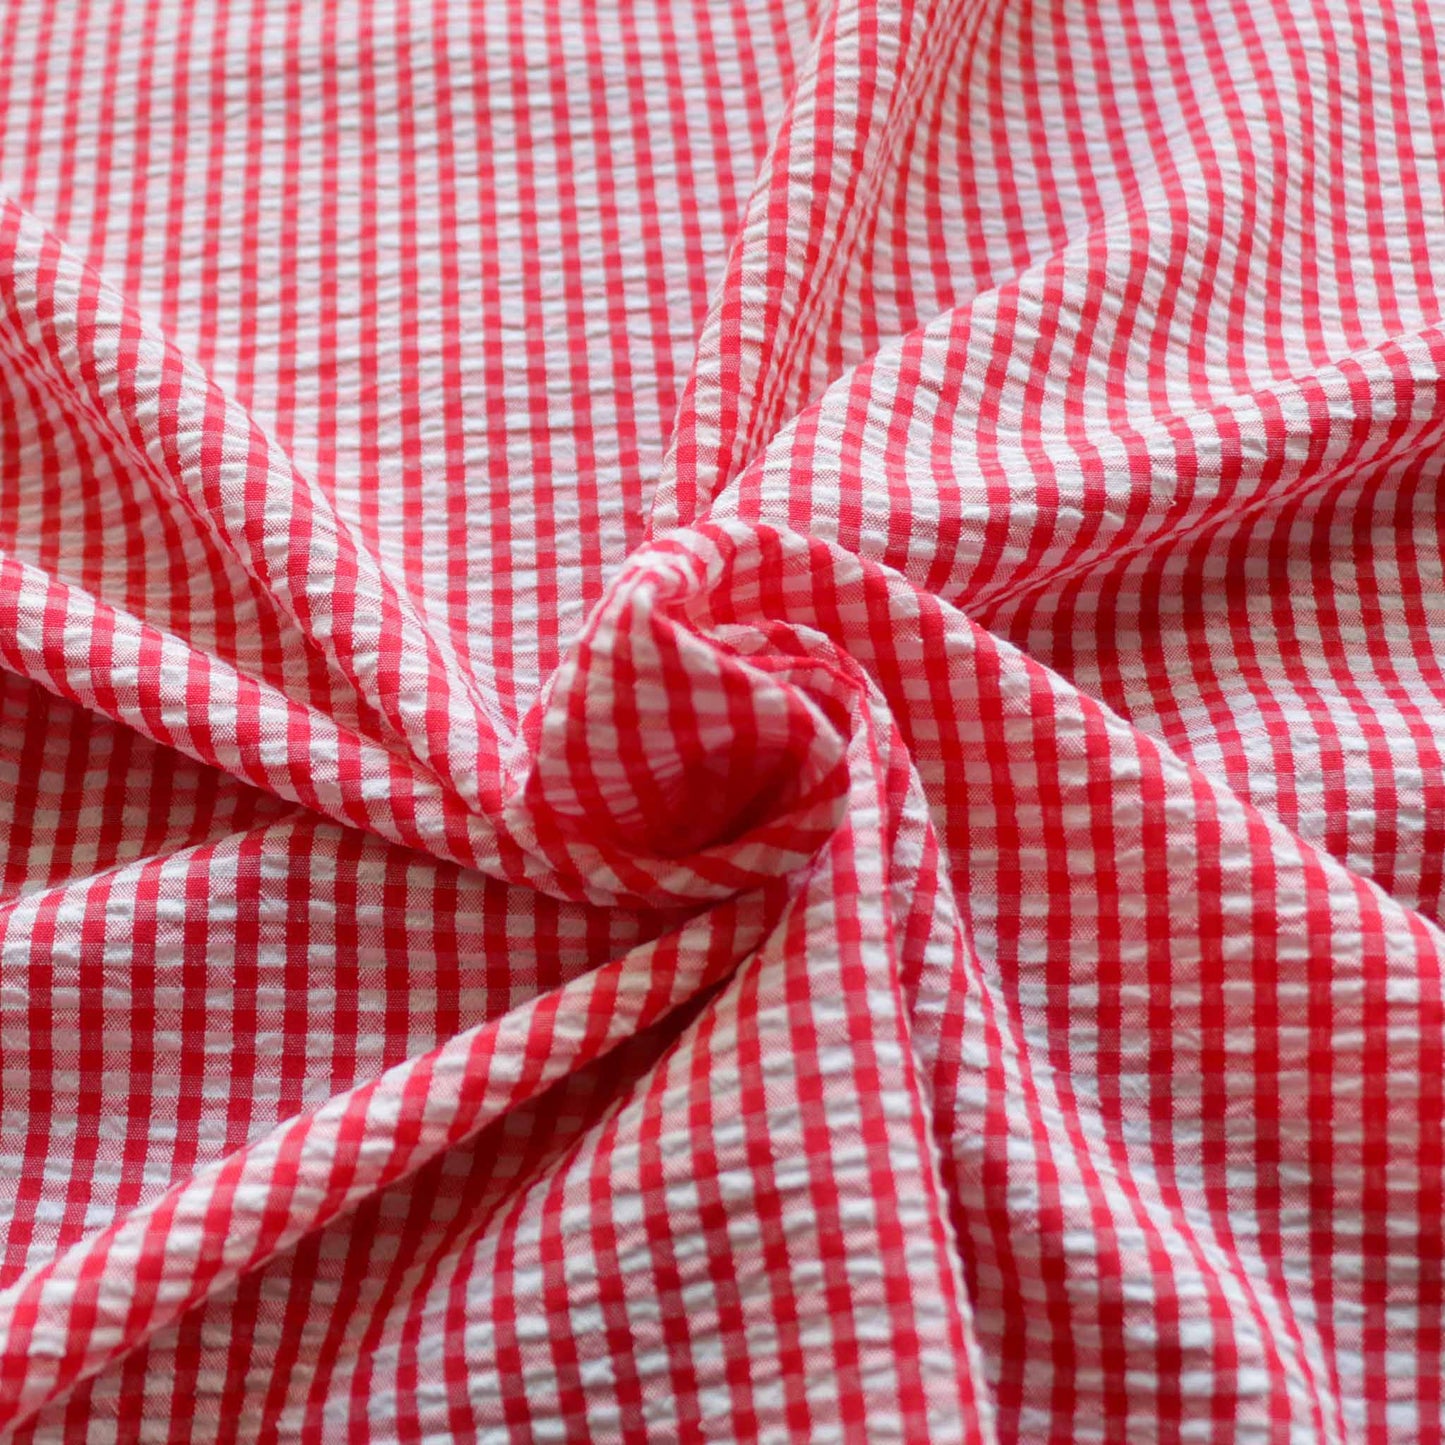 red and white seersucker gingham dressmaking fabric with gingham design